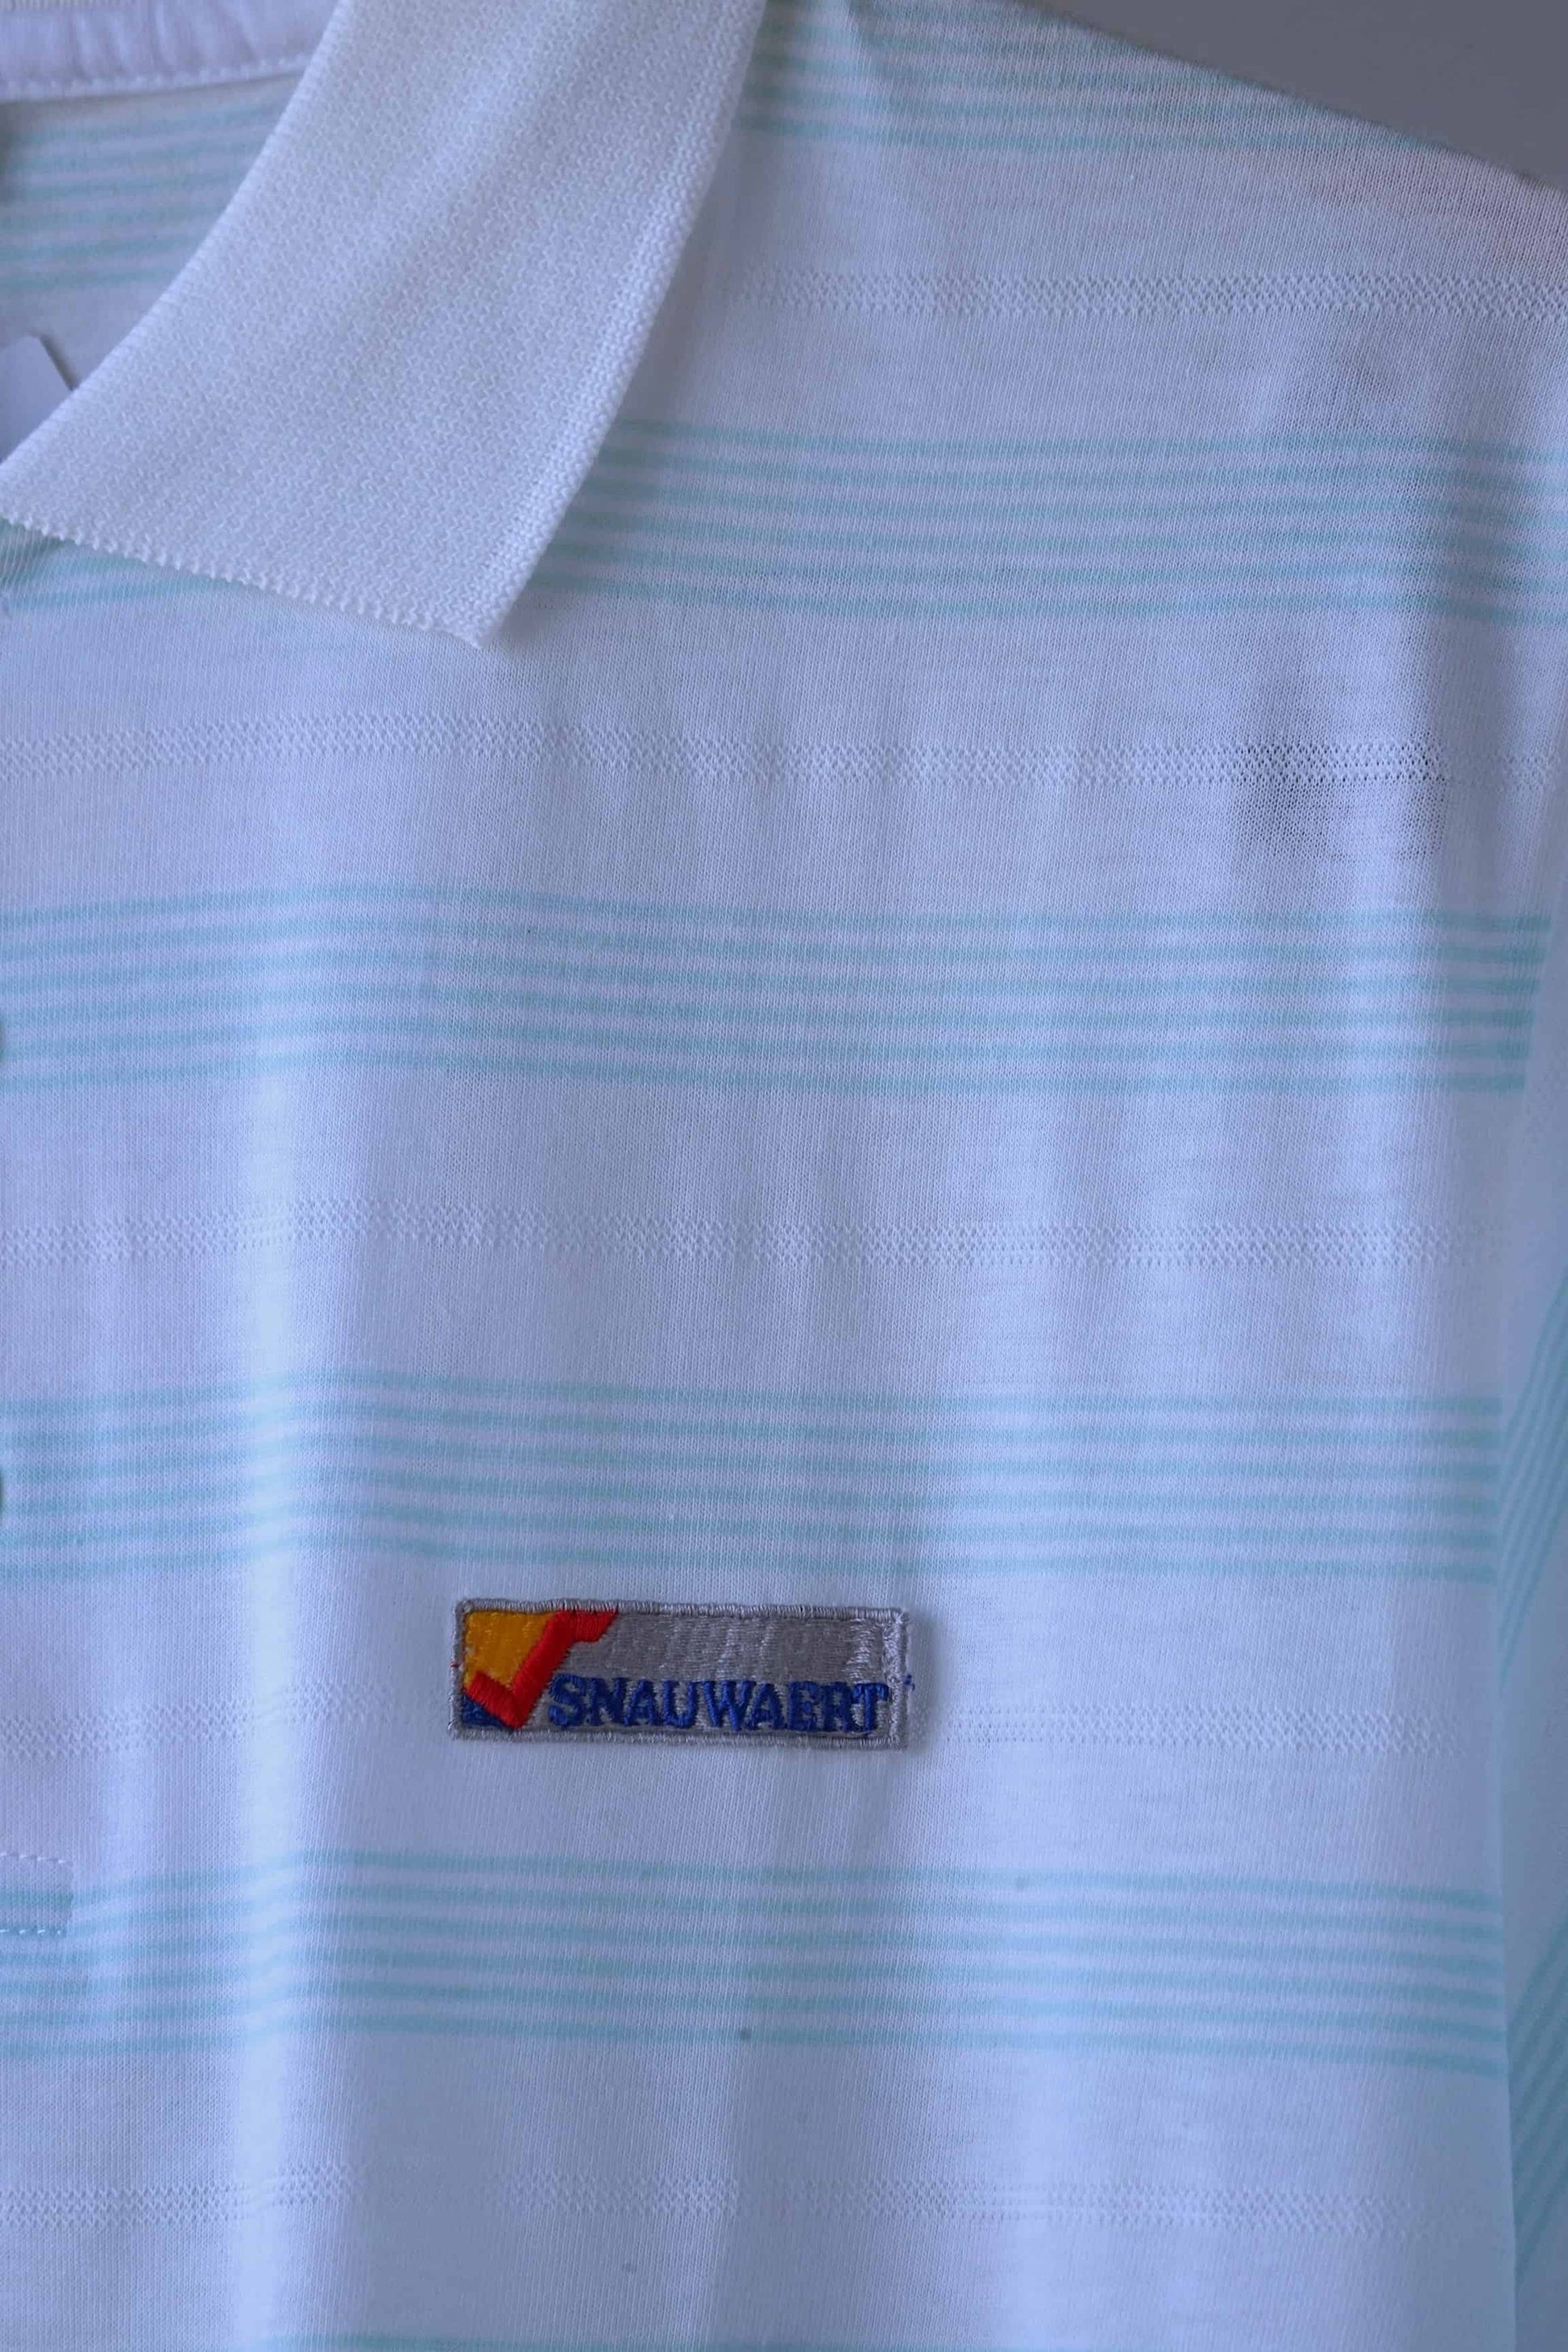 Close up shot of SNAUWEART Vintage Striped Polo in white and mint green